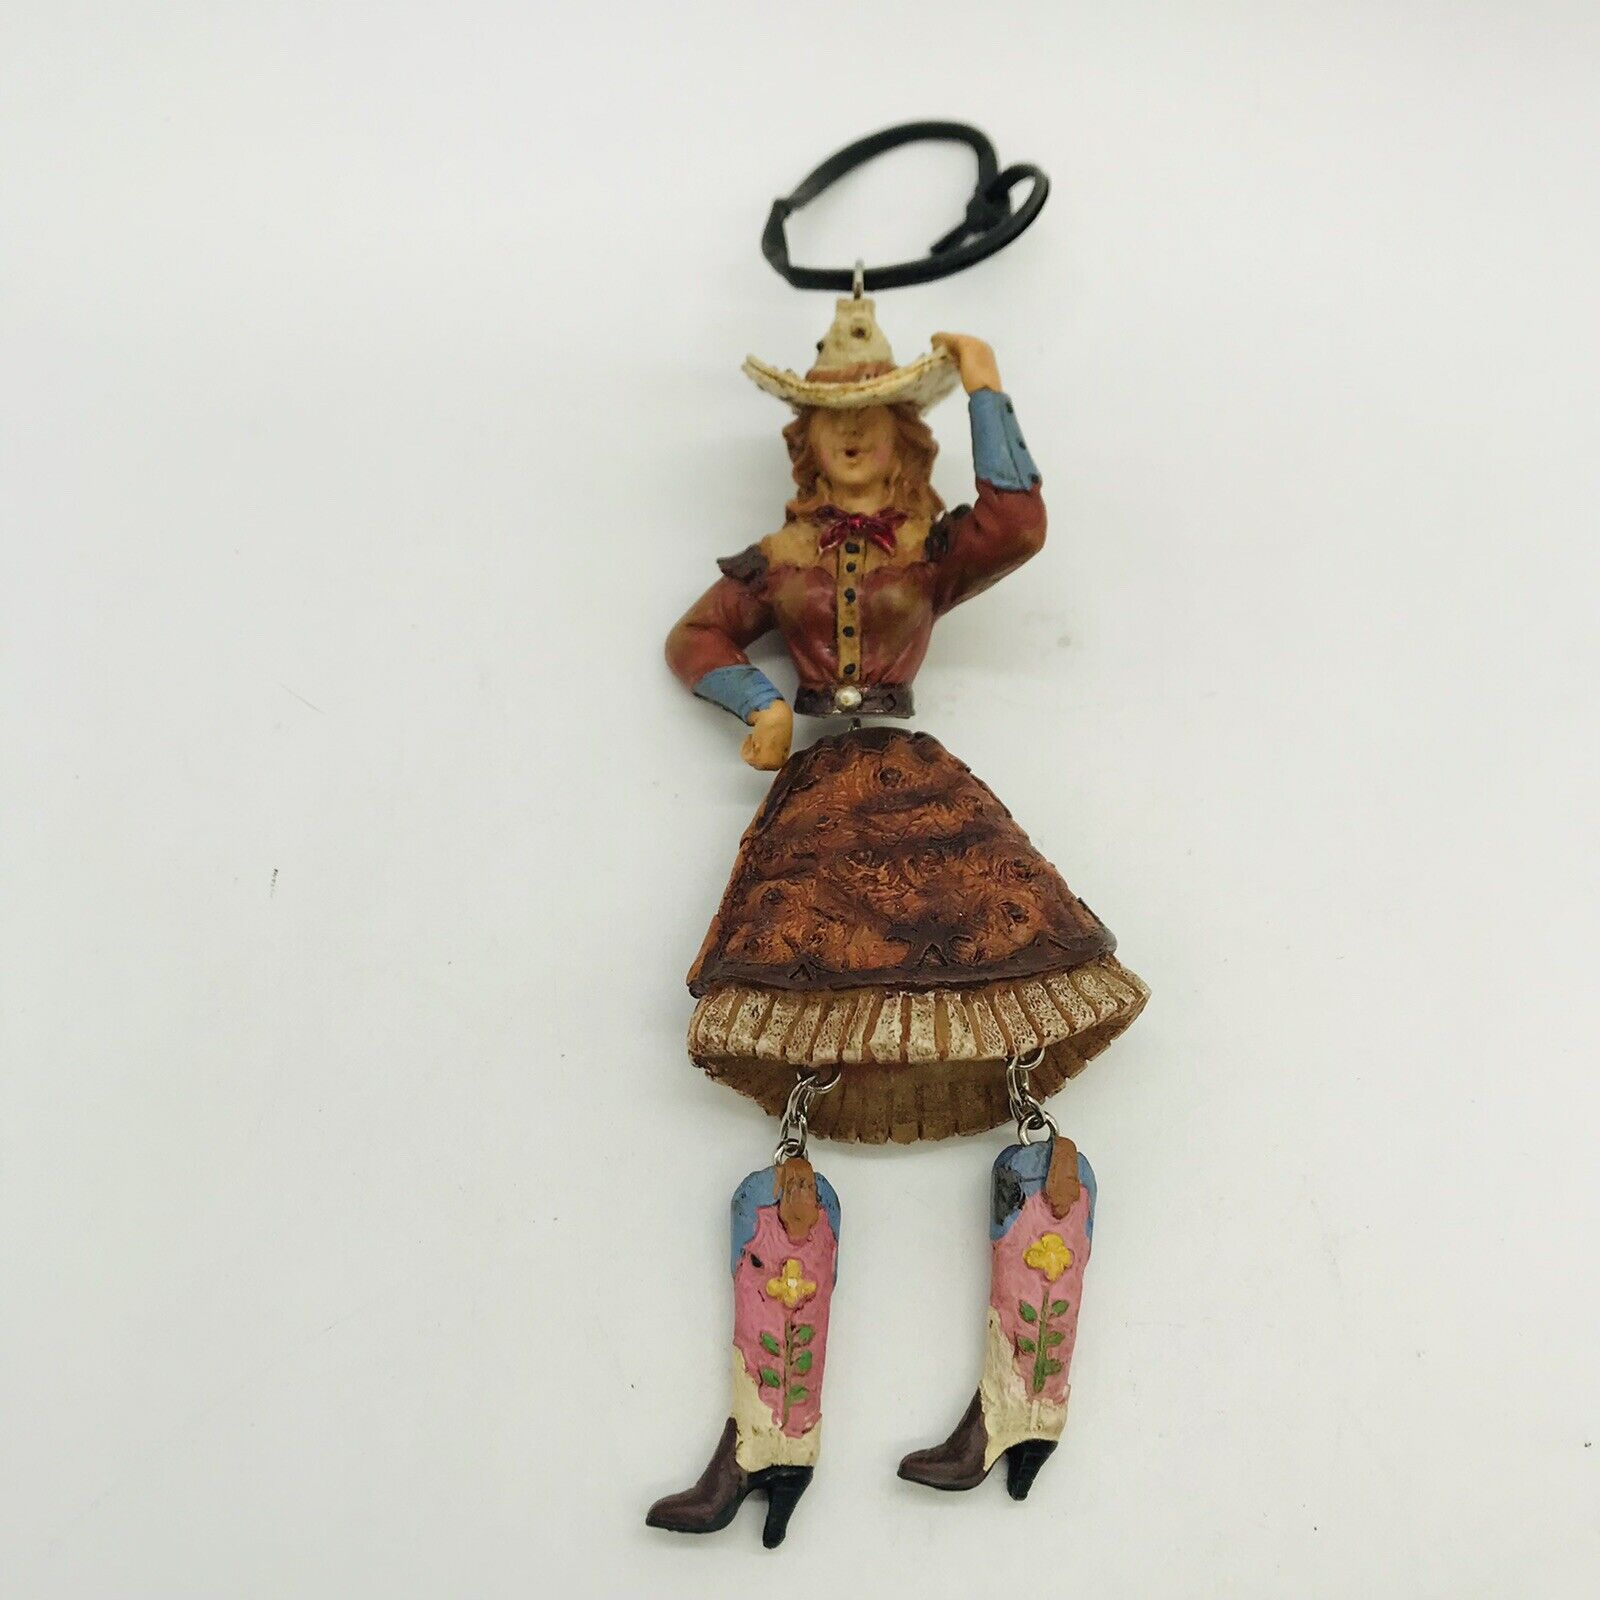 RESIN COWGIRL FIGURE ORNAMENT MOVING WAIST AND LEGS